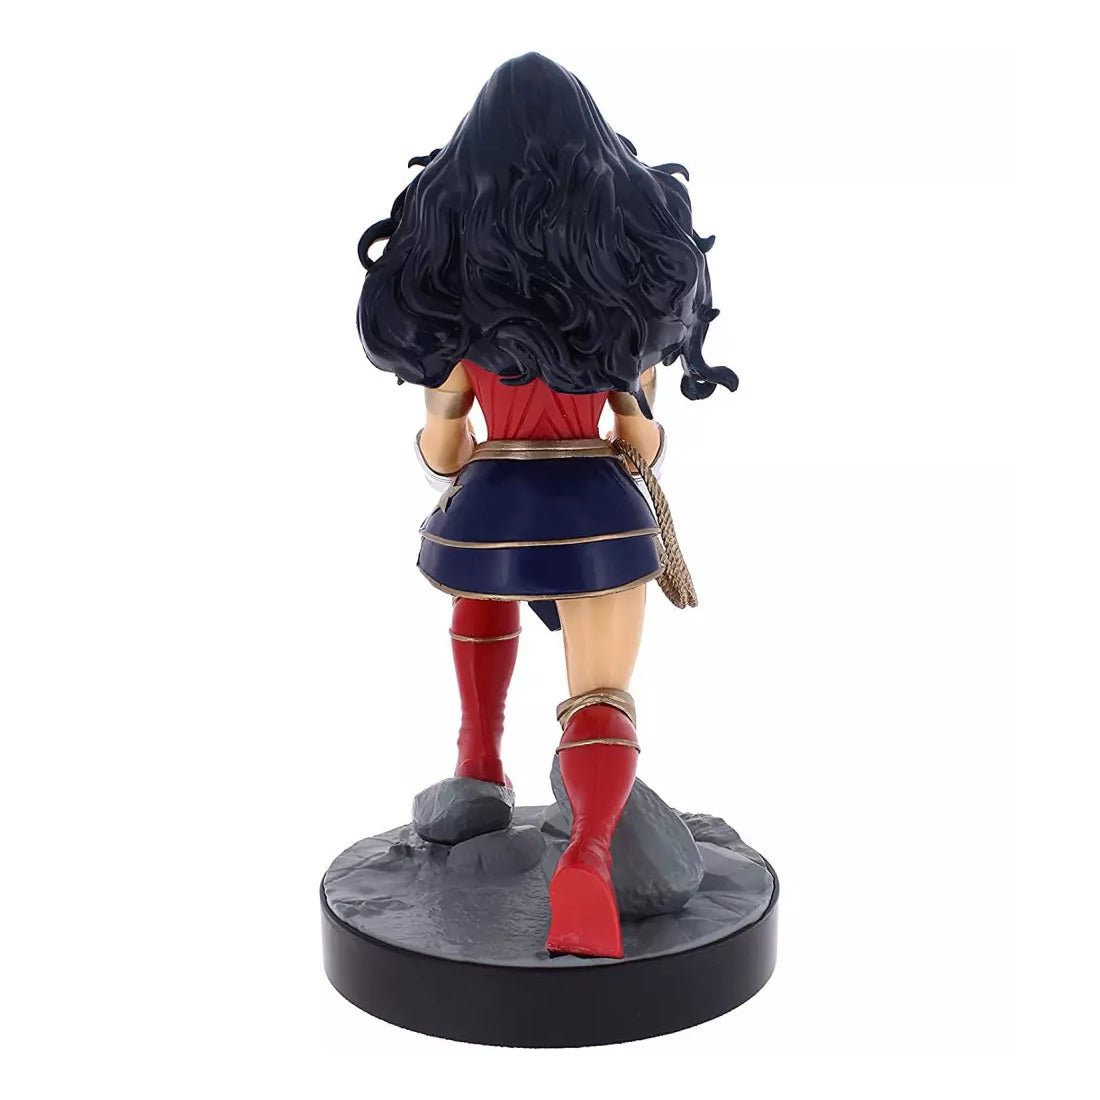 Cable Guys Wonder Woman Gaming Controller & Phone Holder - حامل - Store 974 | ستور ٩٧٤